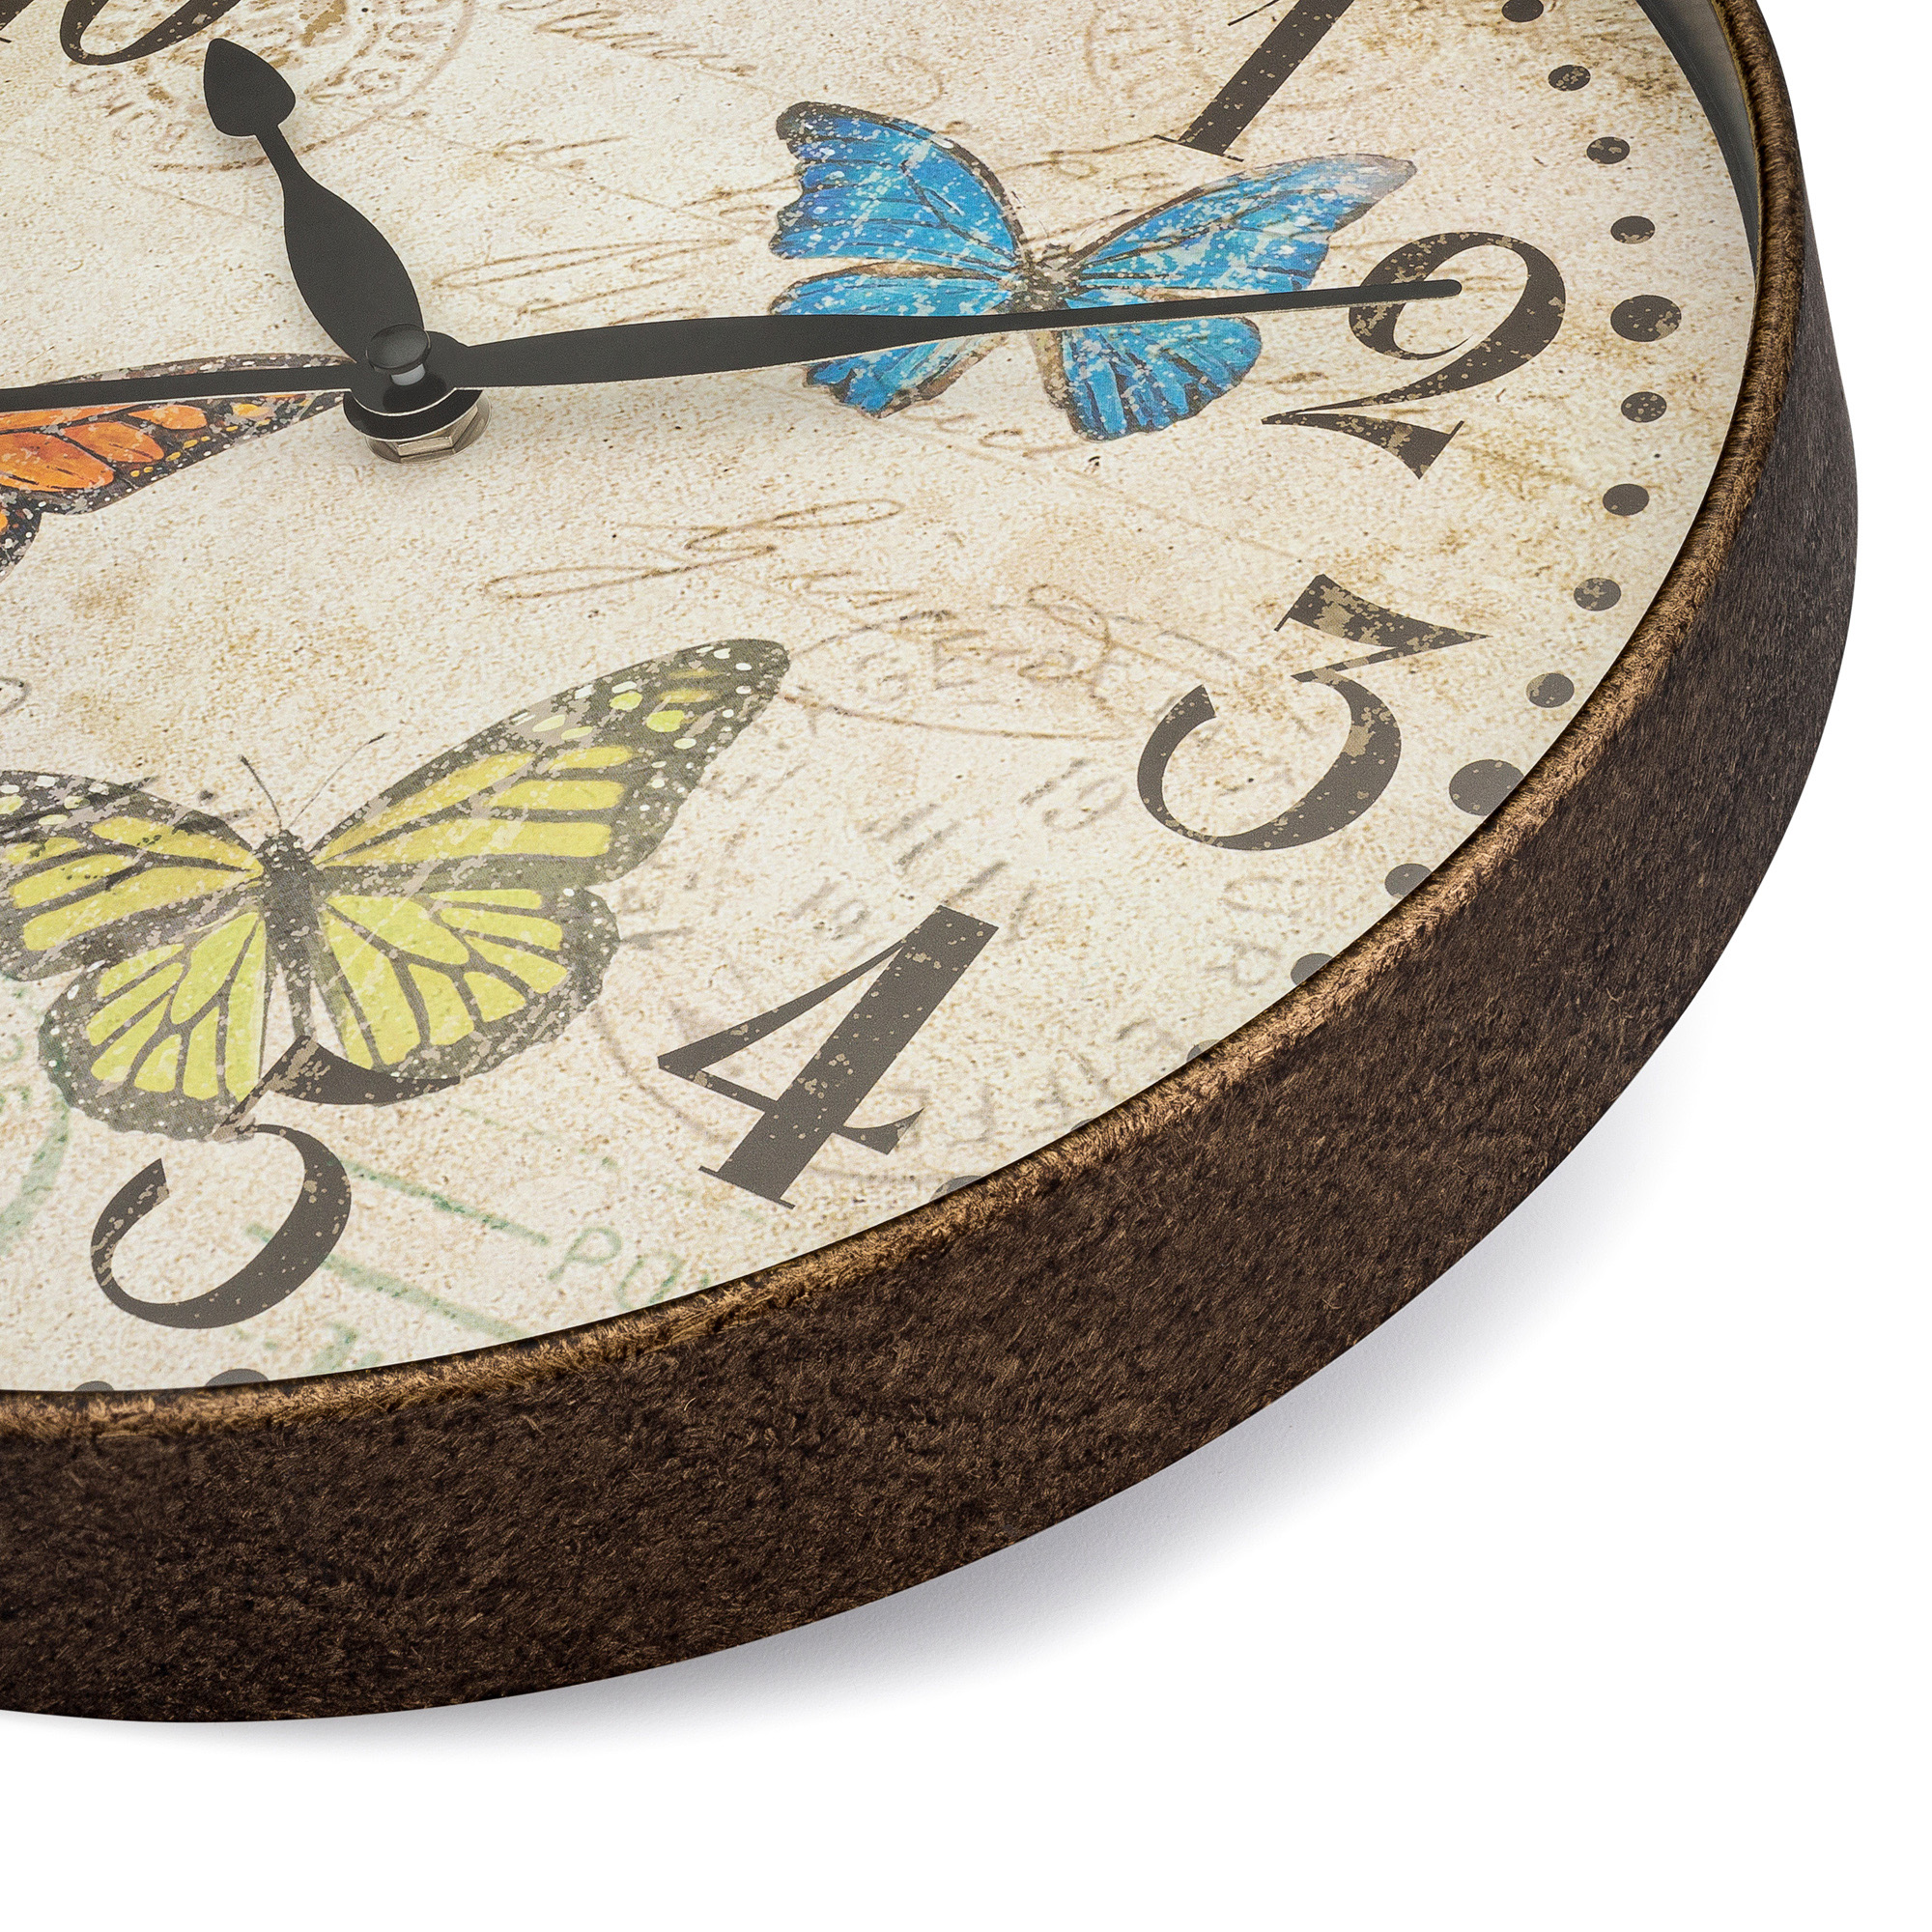 Westclox 12" Round Butterfly Wall Clock - image 3 of 6